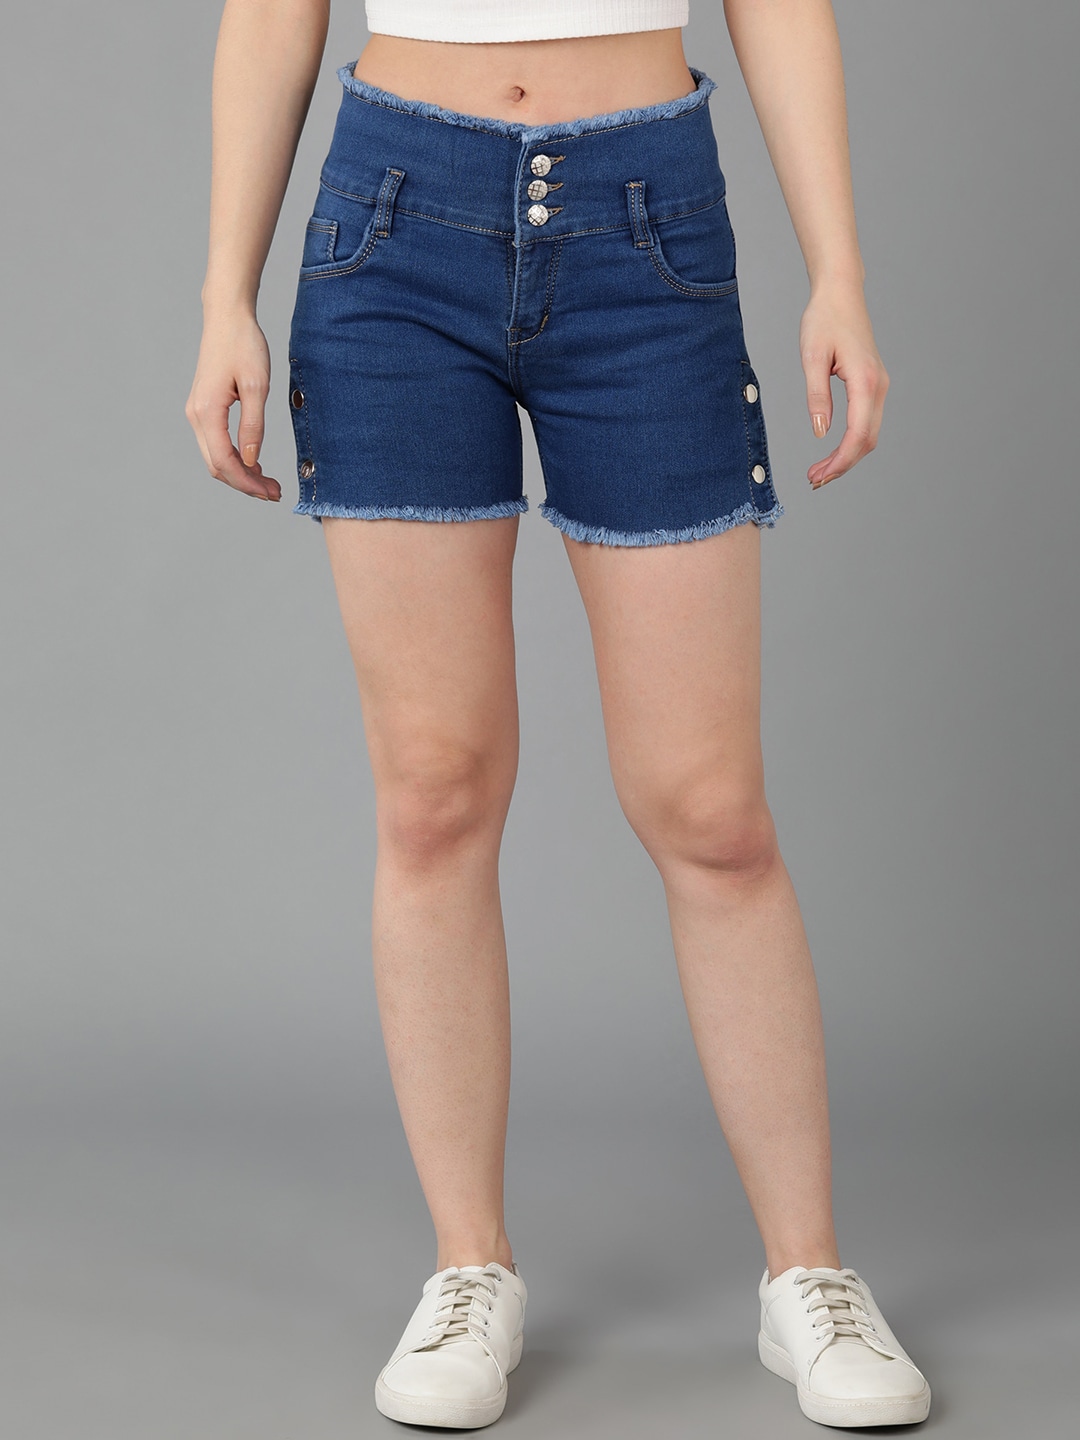 F2M Women High-Rise e-Dry Technology Denim Shorts Price in India